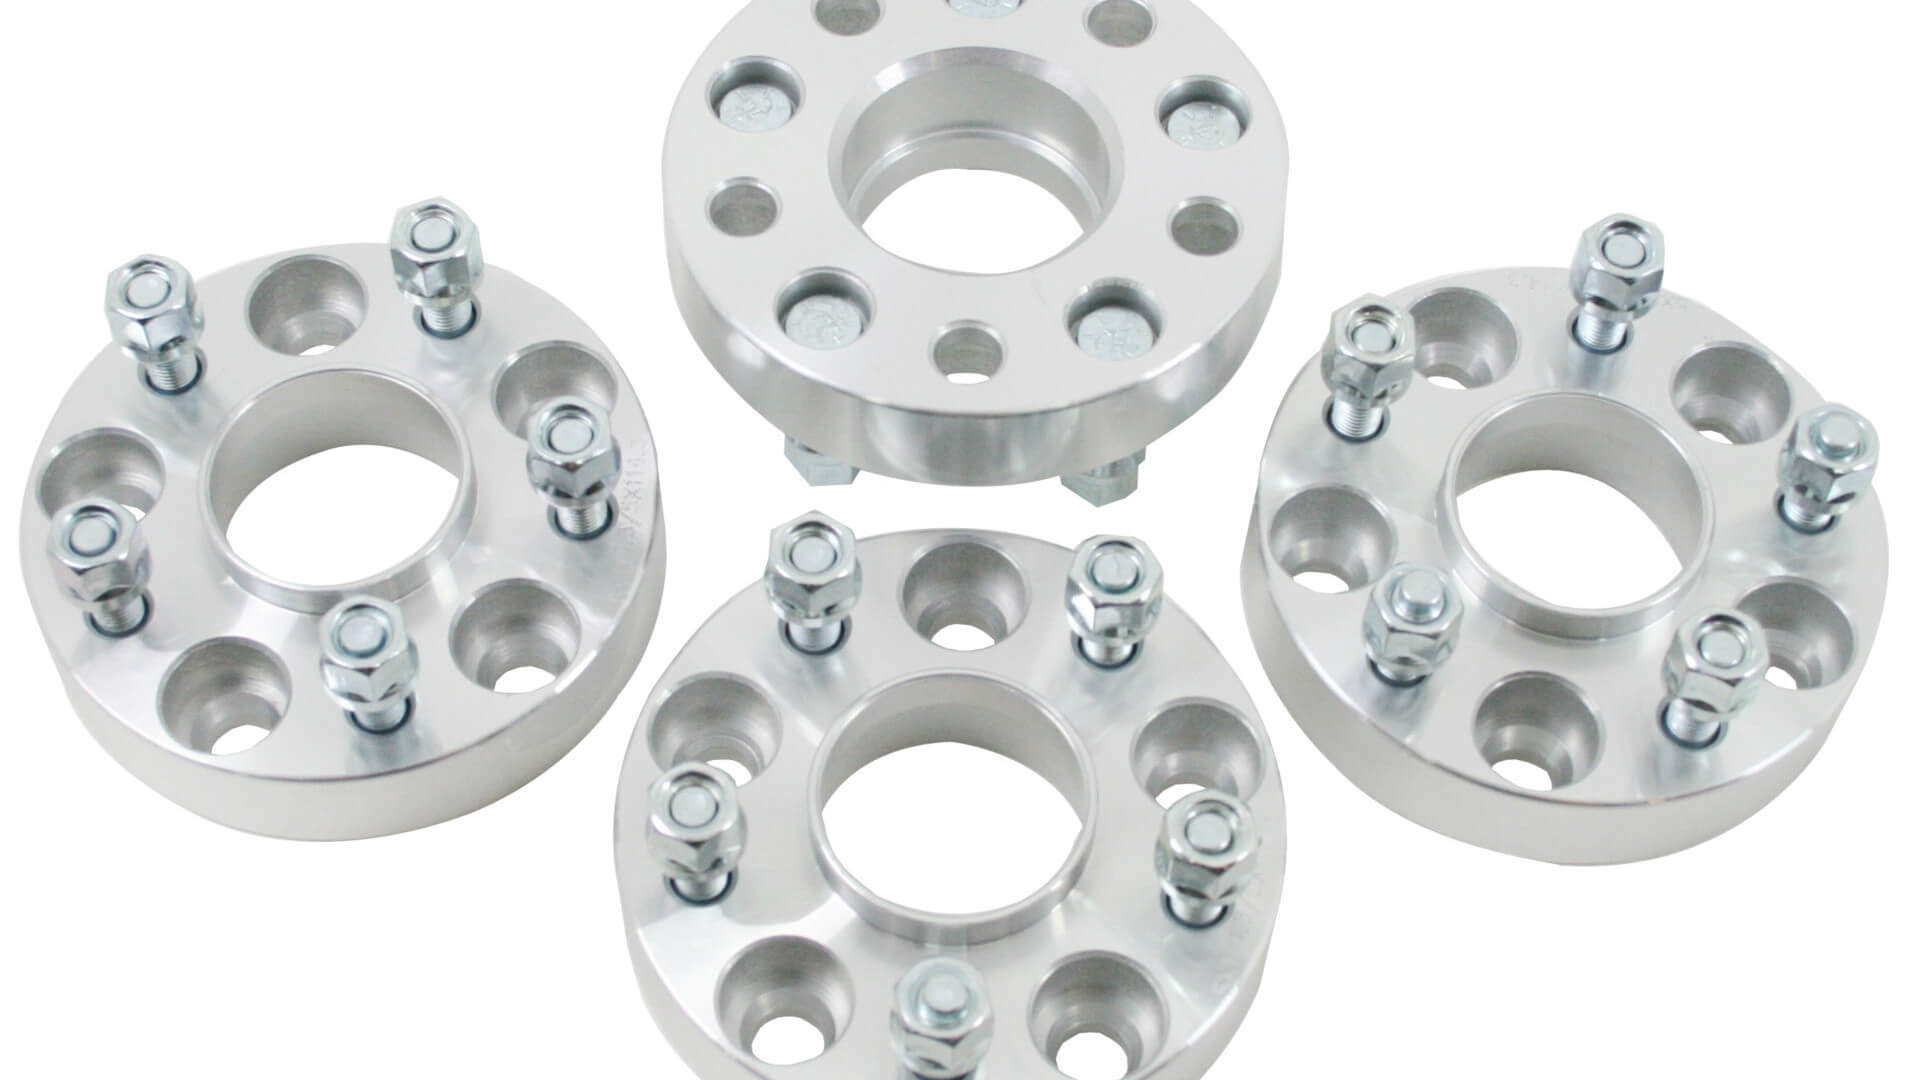 Direct4x4 Alloy Wheels and Wheel Spacers